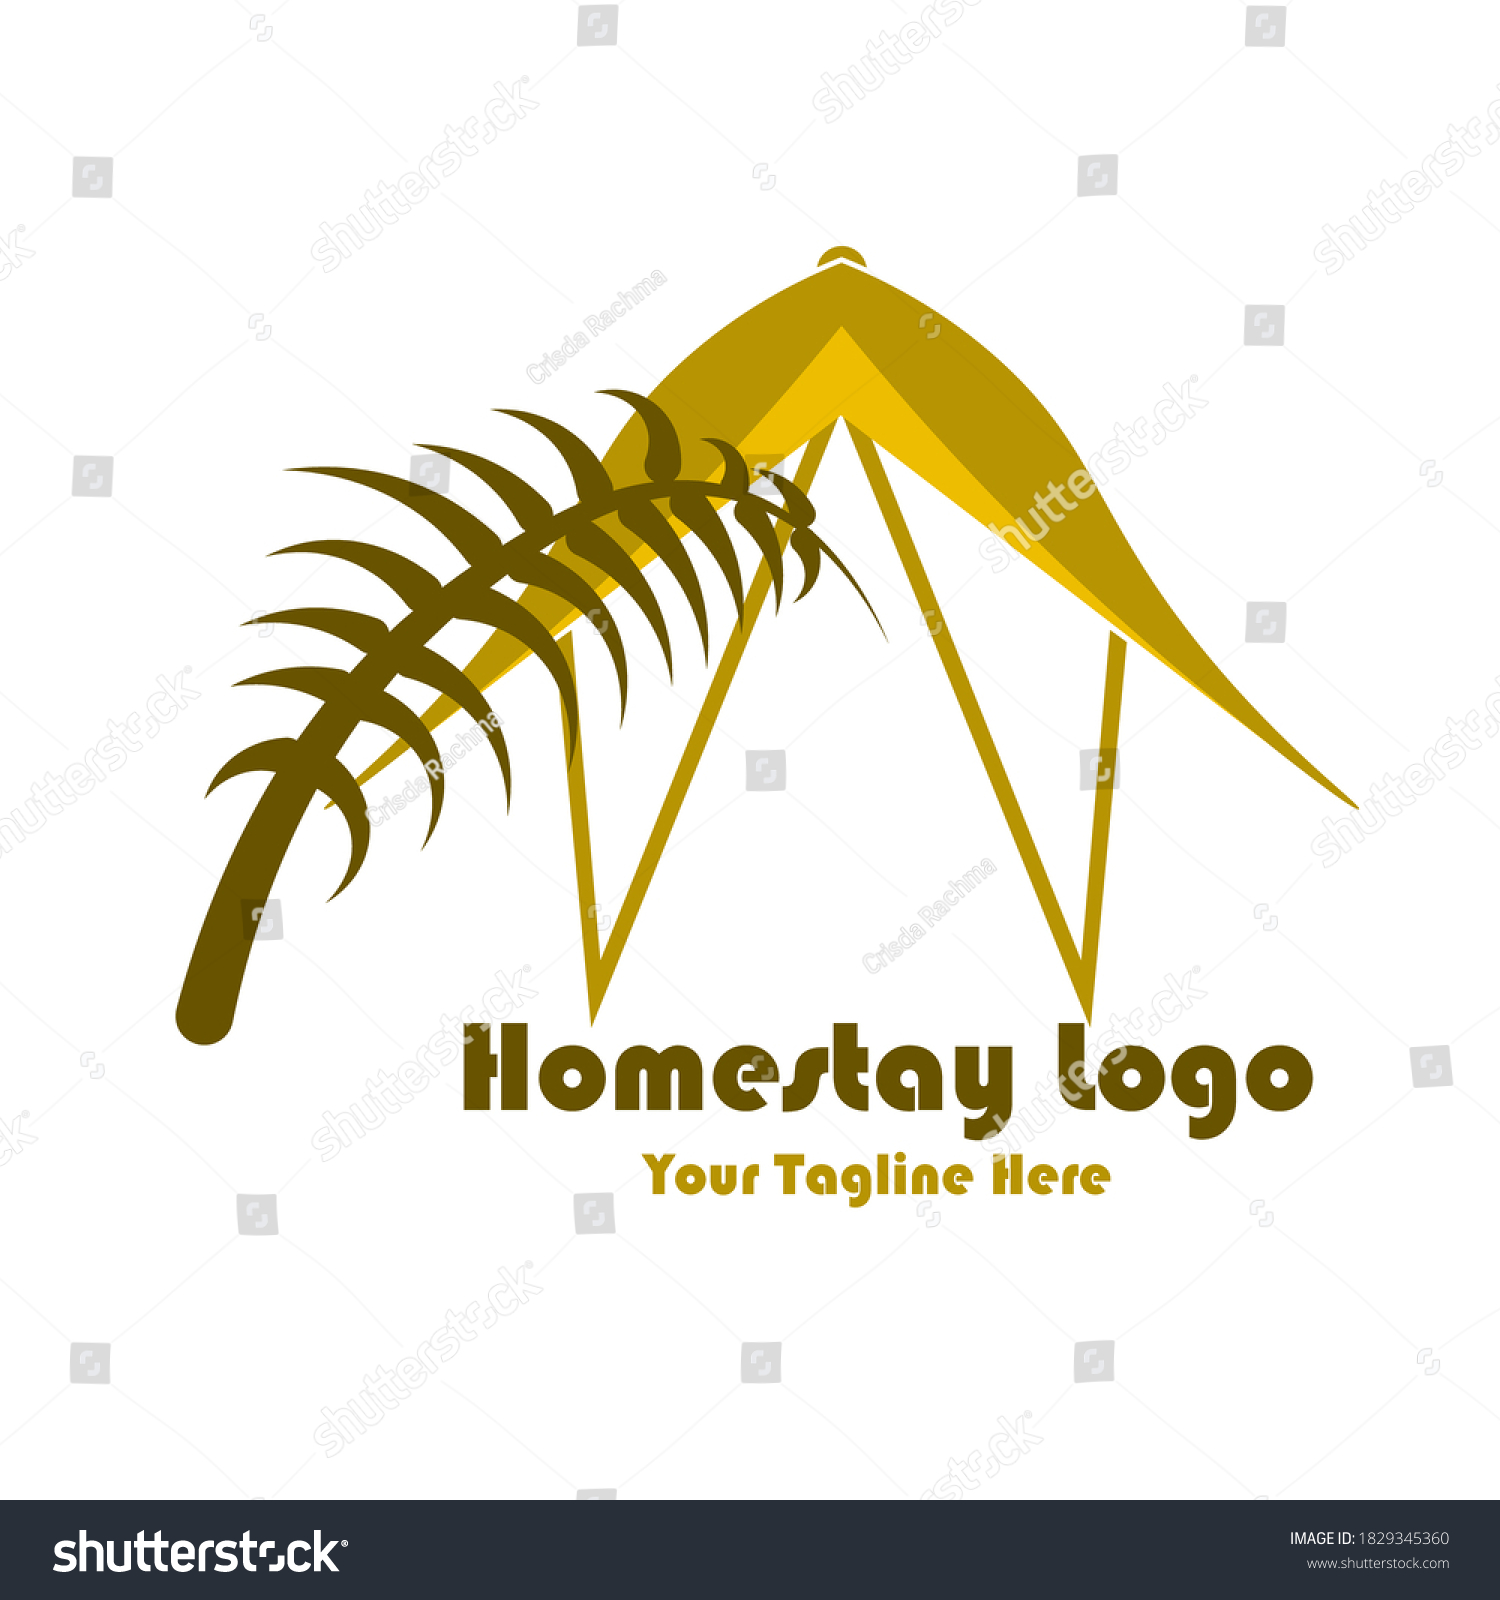 SVG of Luxurious Hotel And Homestay Logo With Shape of Building And Coconut Leaf. Floral Tropical svg